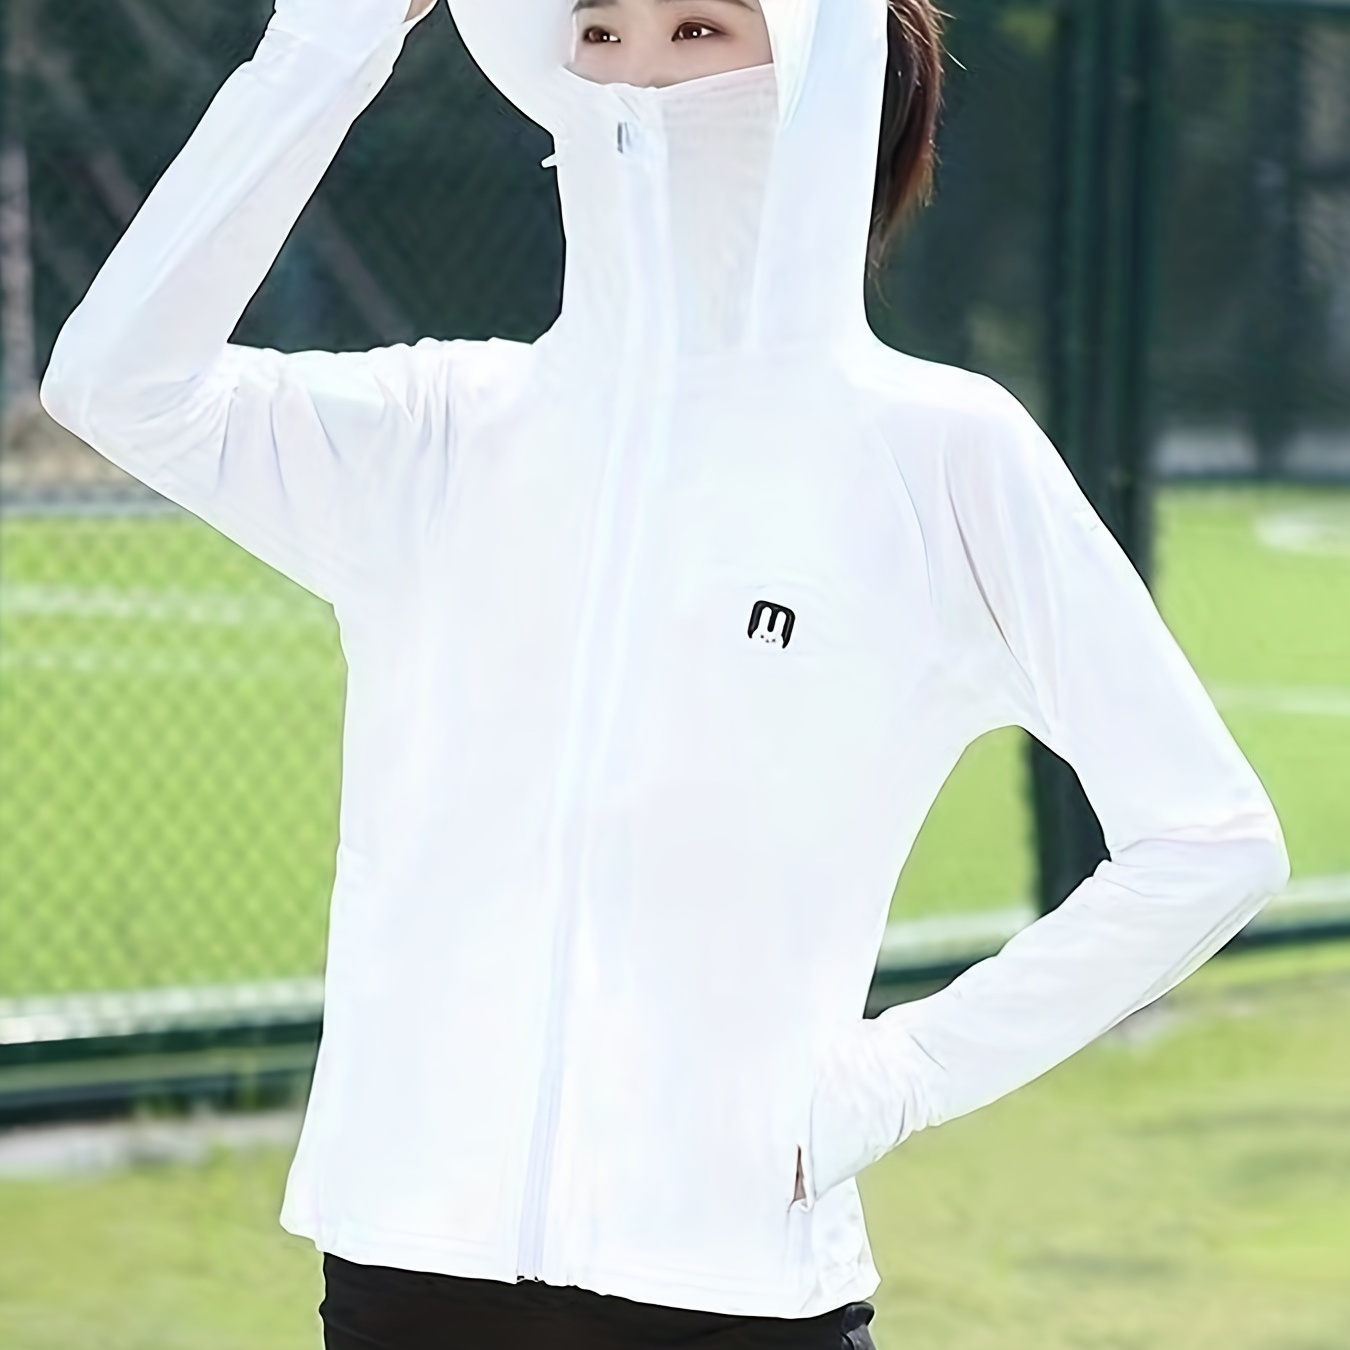 

Women's Cute Bunny Rabbit Uv Protection Jacket - Long Sleeve Face Cover Outdoor Shawl Hoodie Shirt